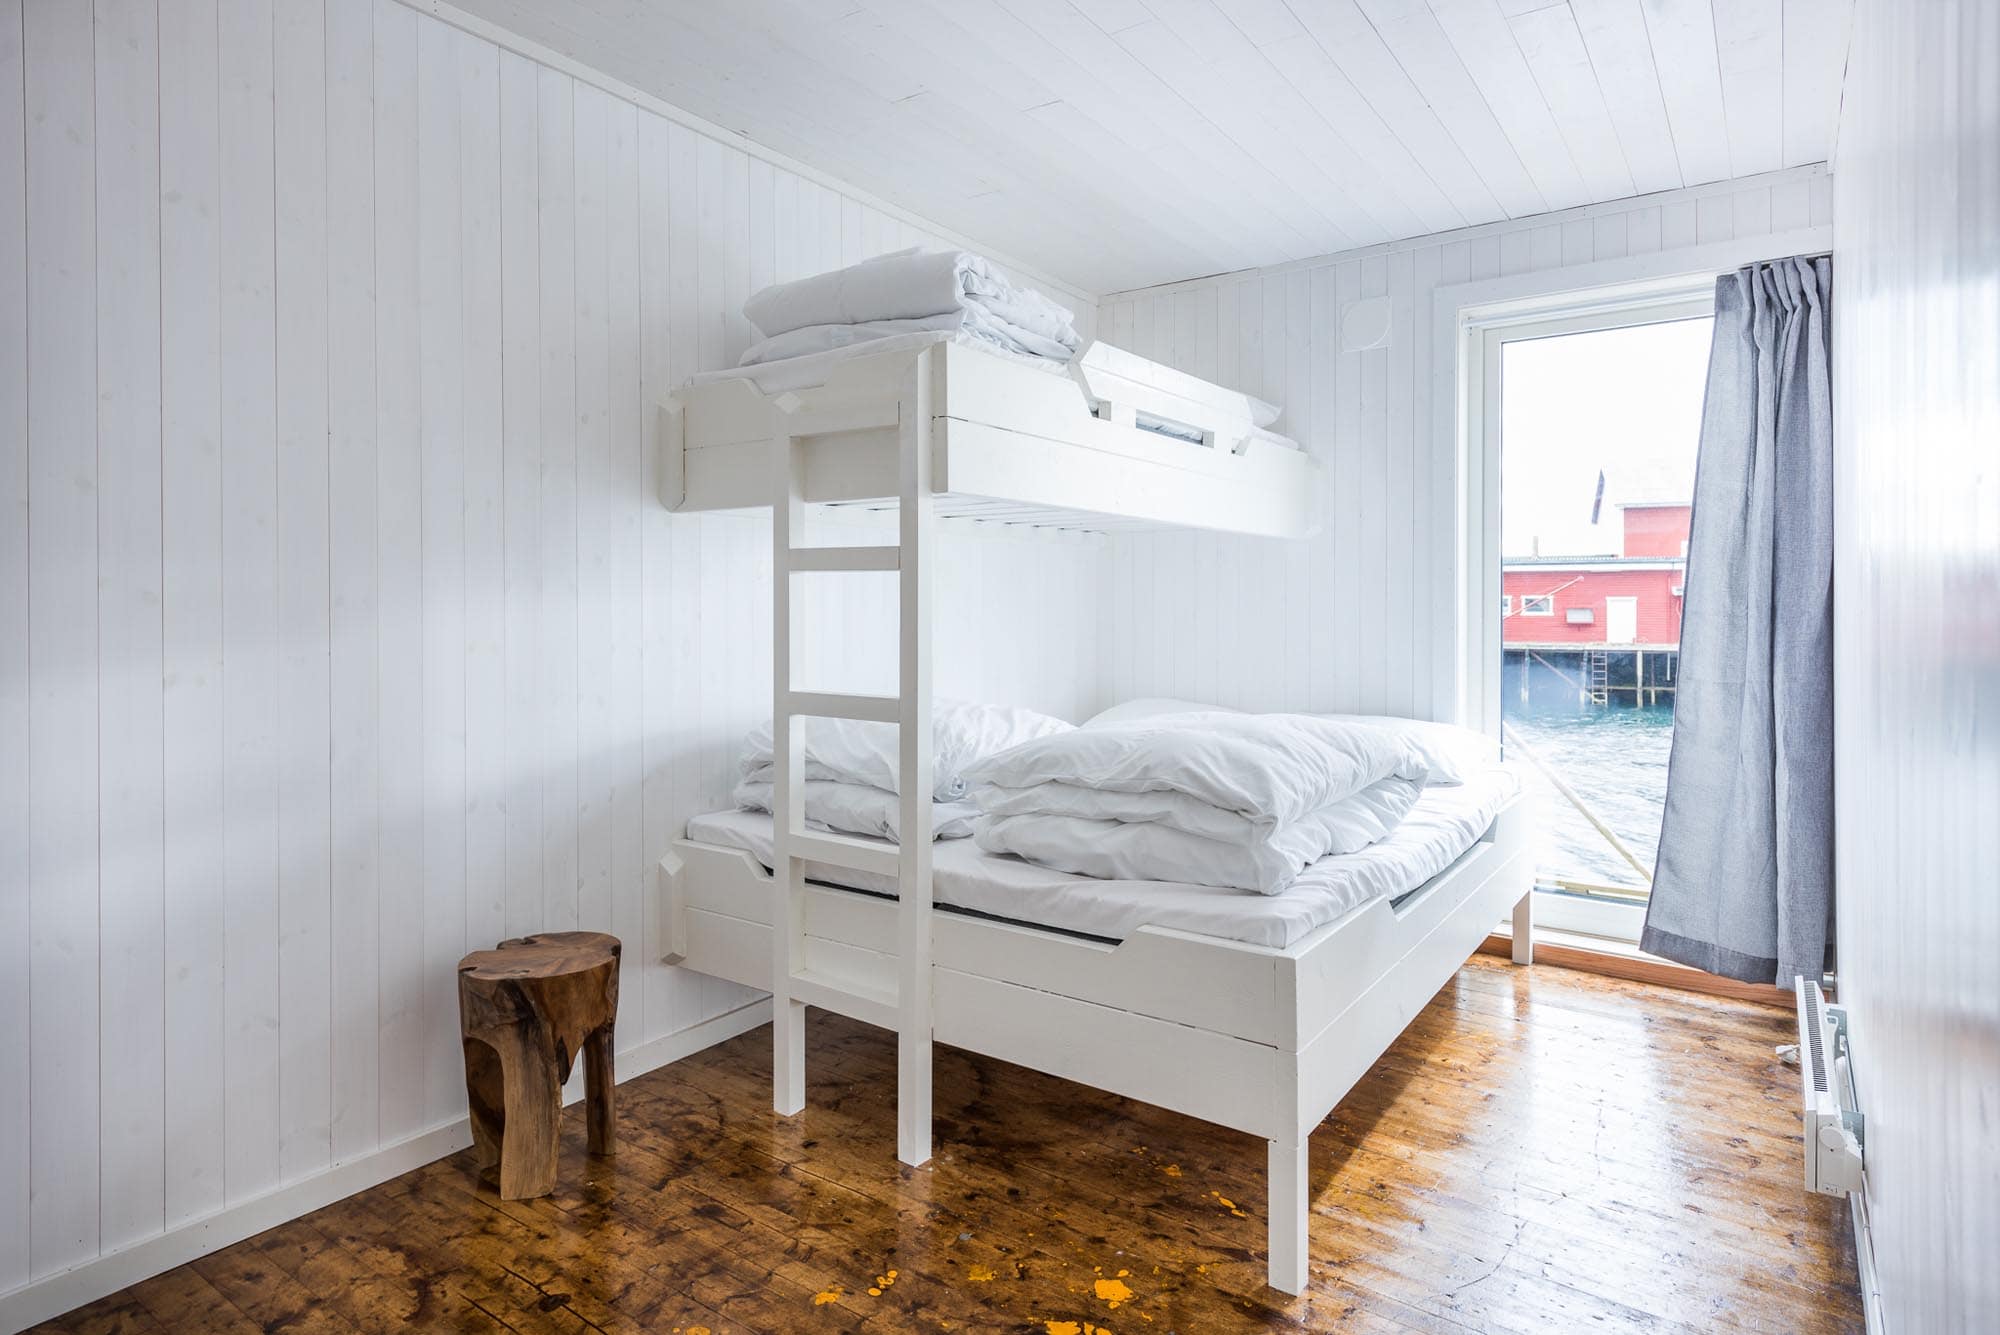 Accommodation rental in fisherman cottages at Ballstad